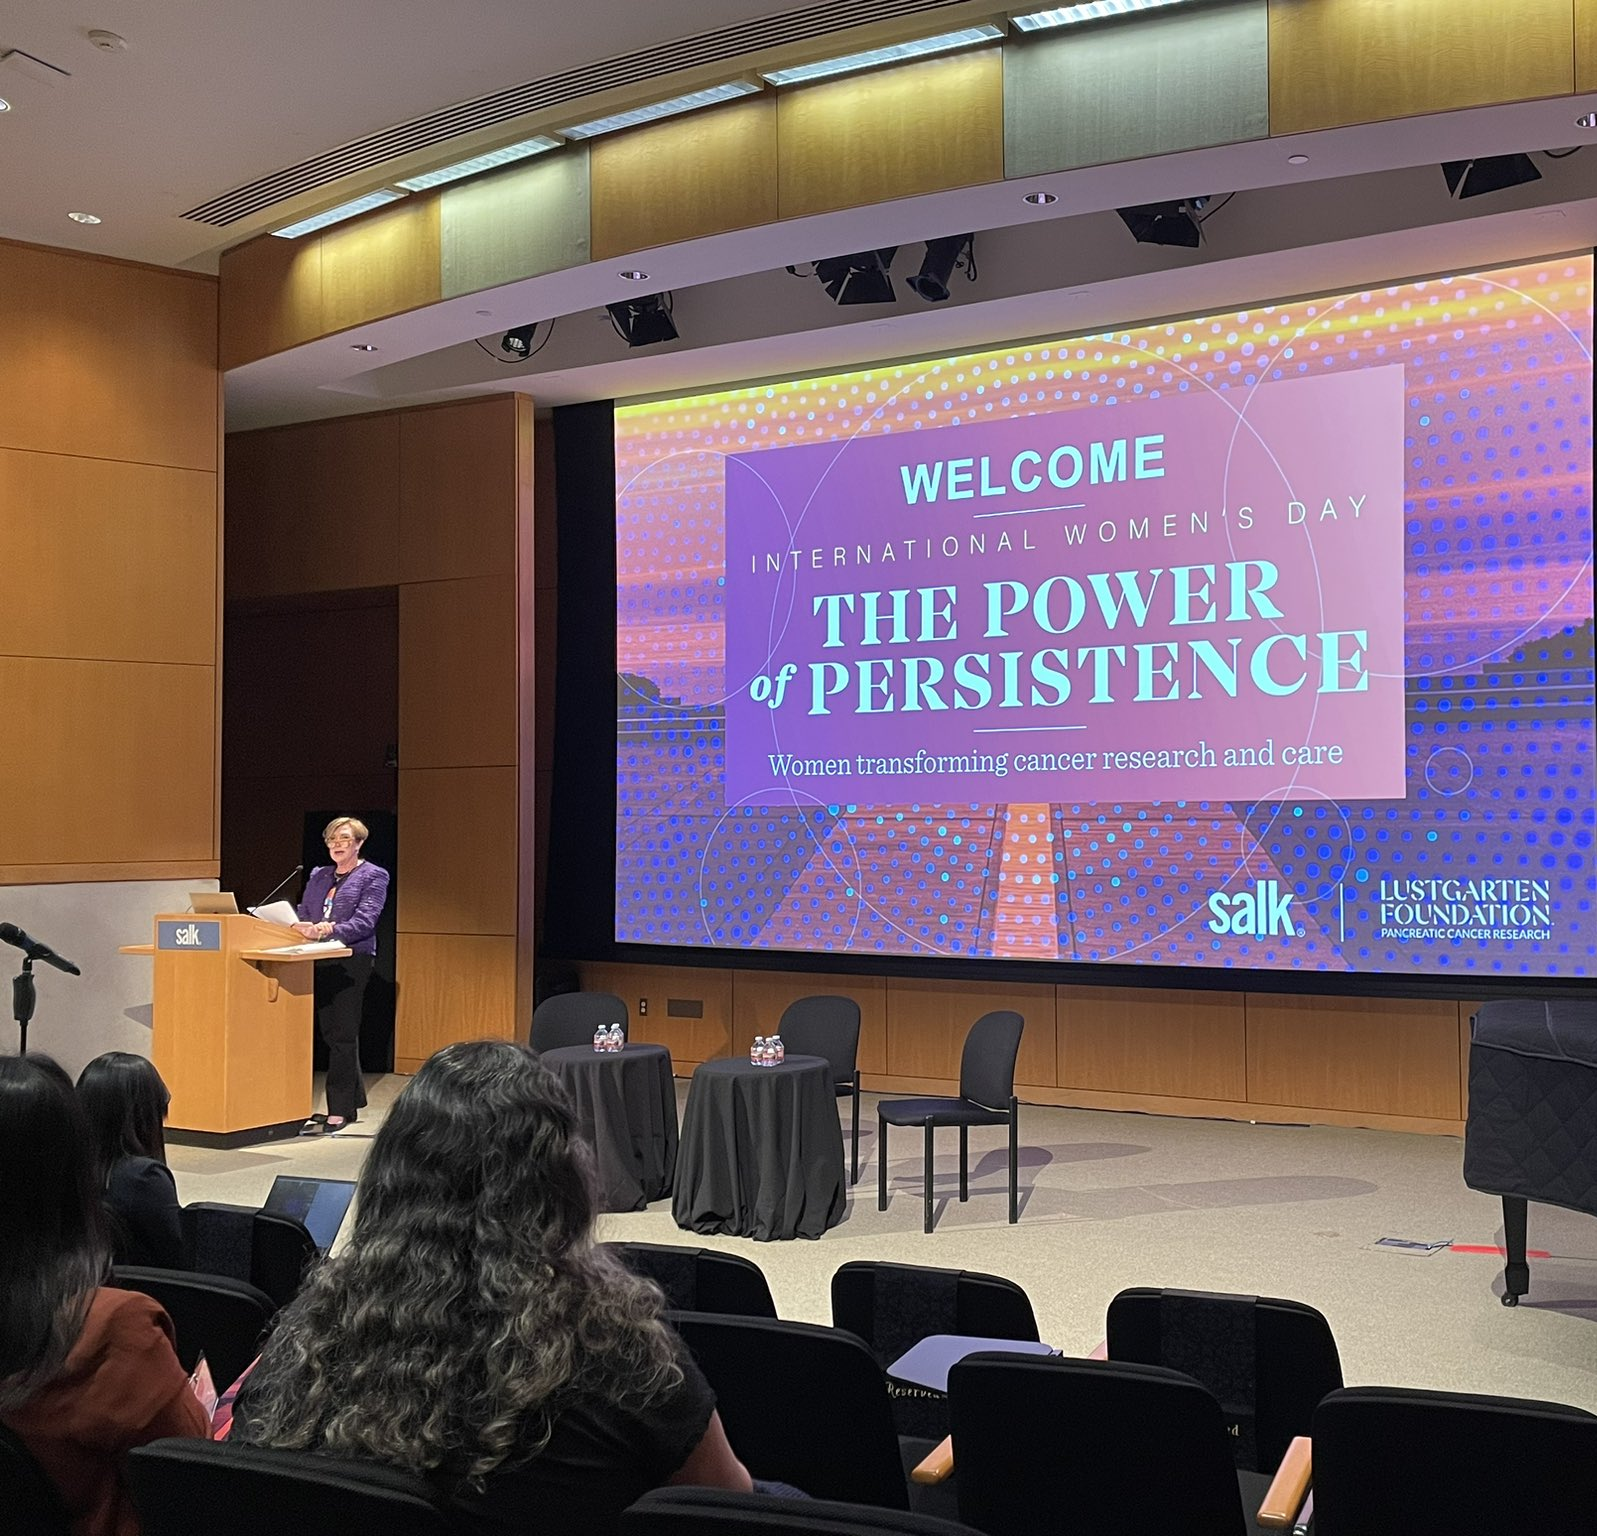 Lustgarten Celebrates International Women’s Day with “The Power of Persistence: Women Transforming Cancer Research and Care”